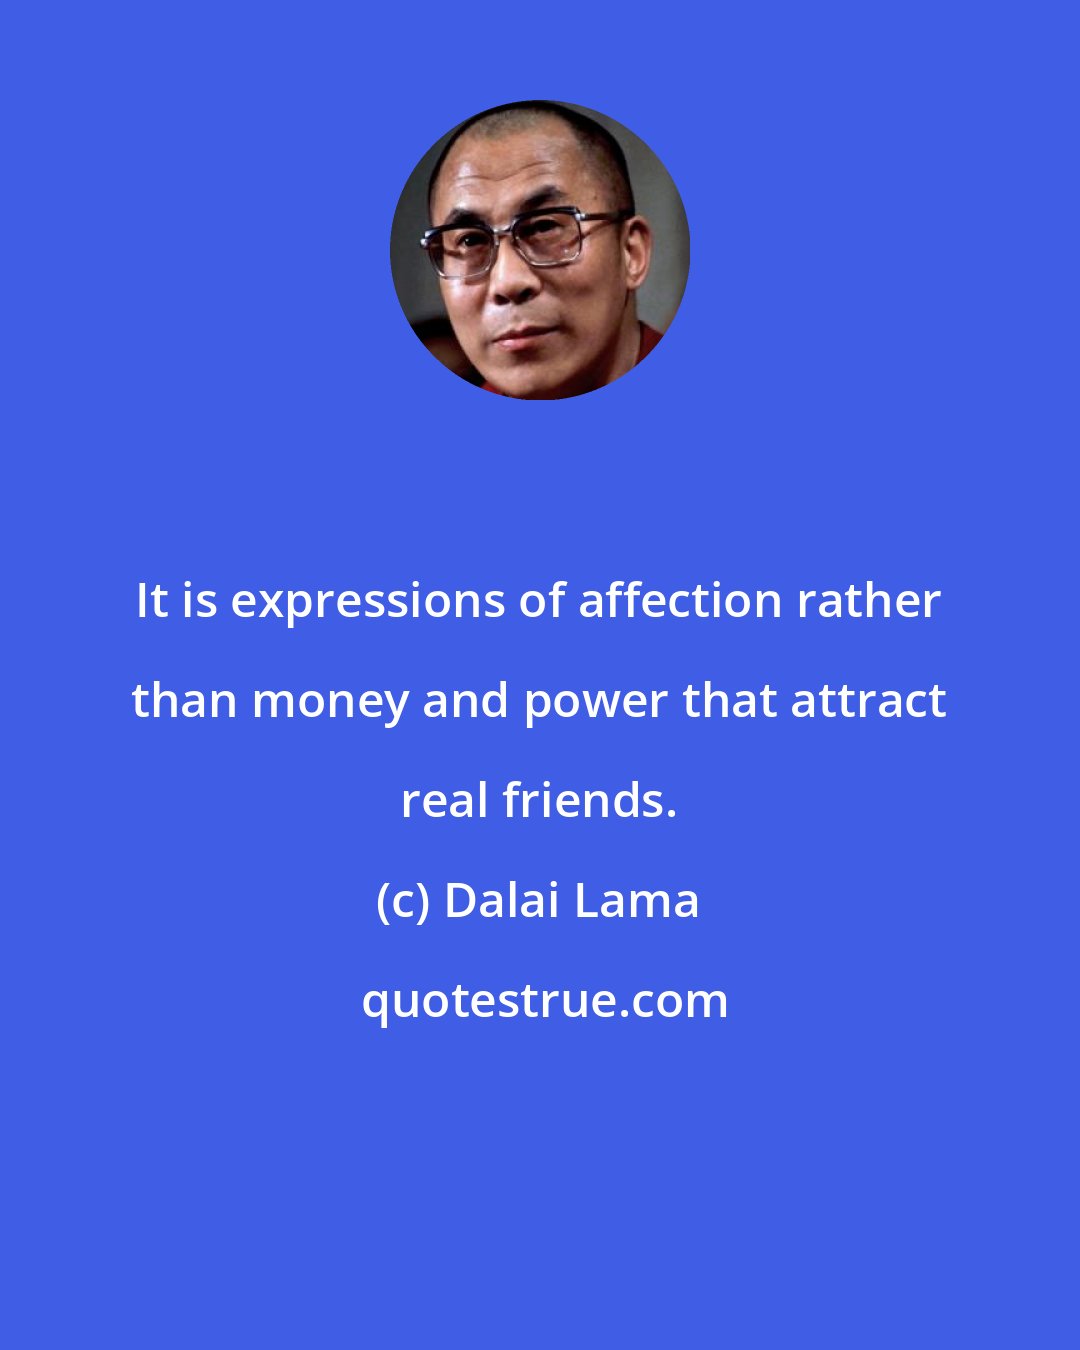 Dalai Lama: It is expressions of affection rather than money and power that attract real friends.